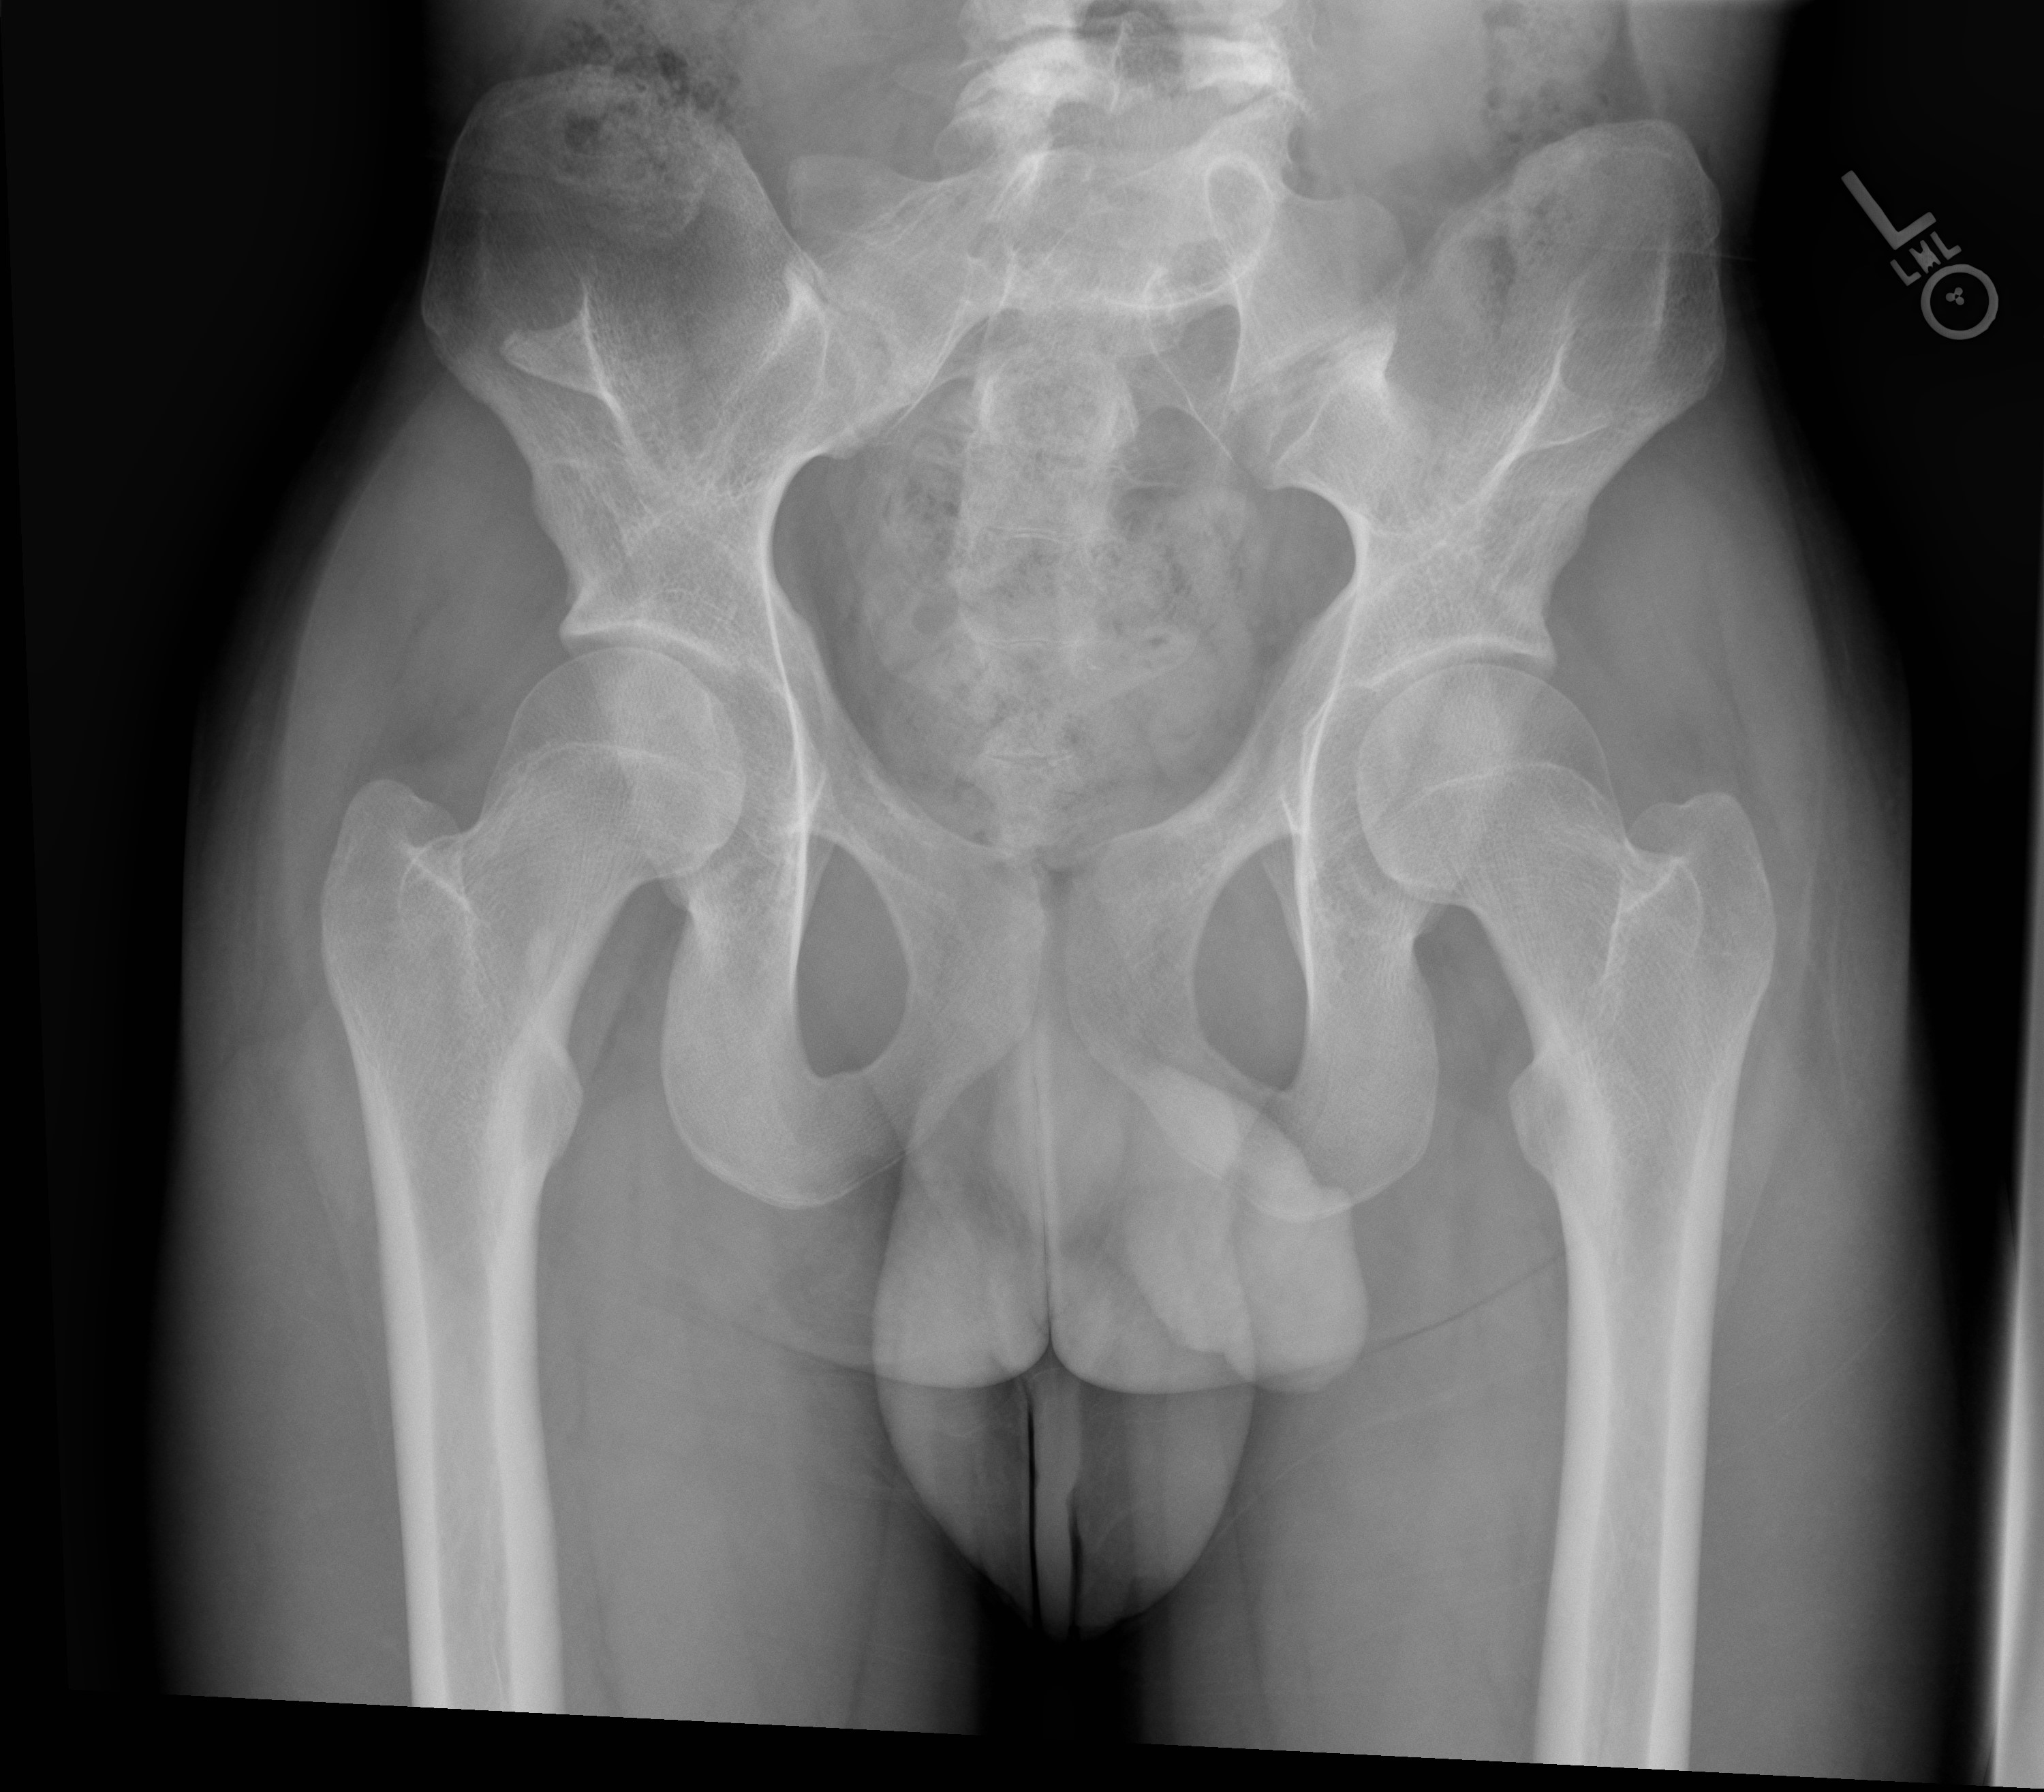 Radiographic single frontal anteroposterior (AP) view of the pelvis shows symmetric osseous processes of the bilateral iliac bones